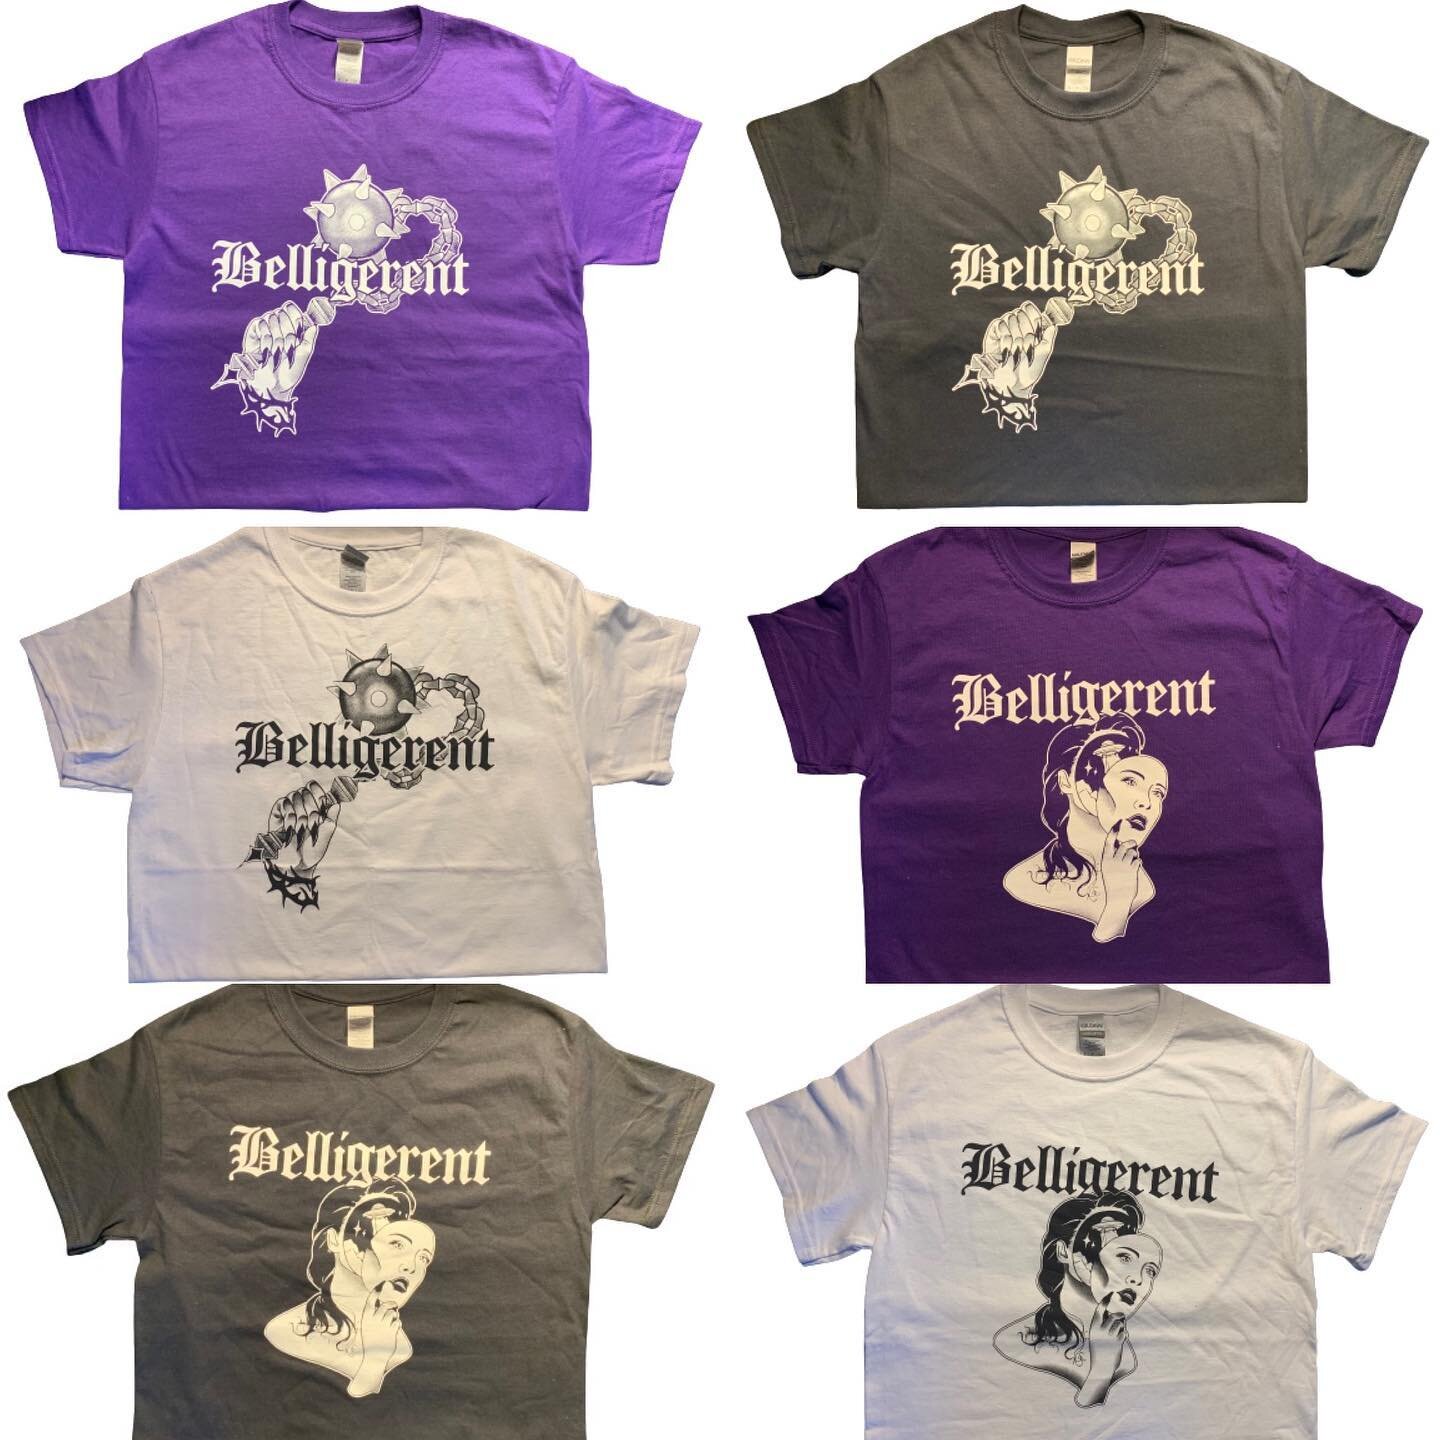 Our new shirts are now available to purchase online on our website . www.getbelligerent.com ~ Sizes S-2X available ! 👧 🚀 👾👽 #belligerent #fashion #charlottenc #limitededition #space #trippy #gothic #lit #likeit ❄️ 
Artworks from @jaketattooer616 